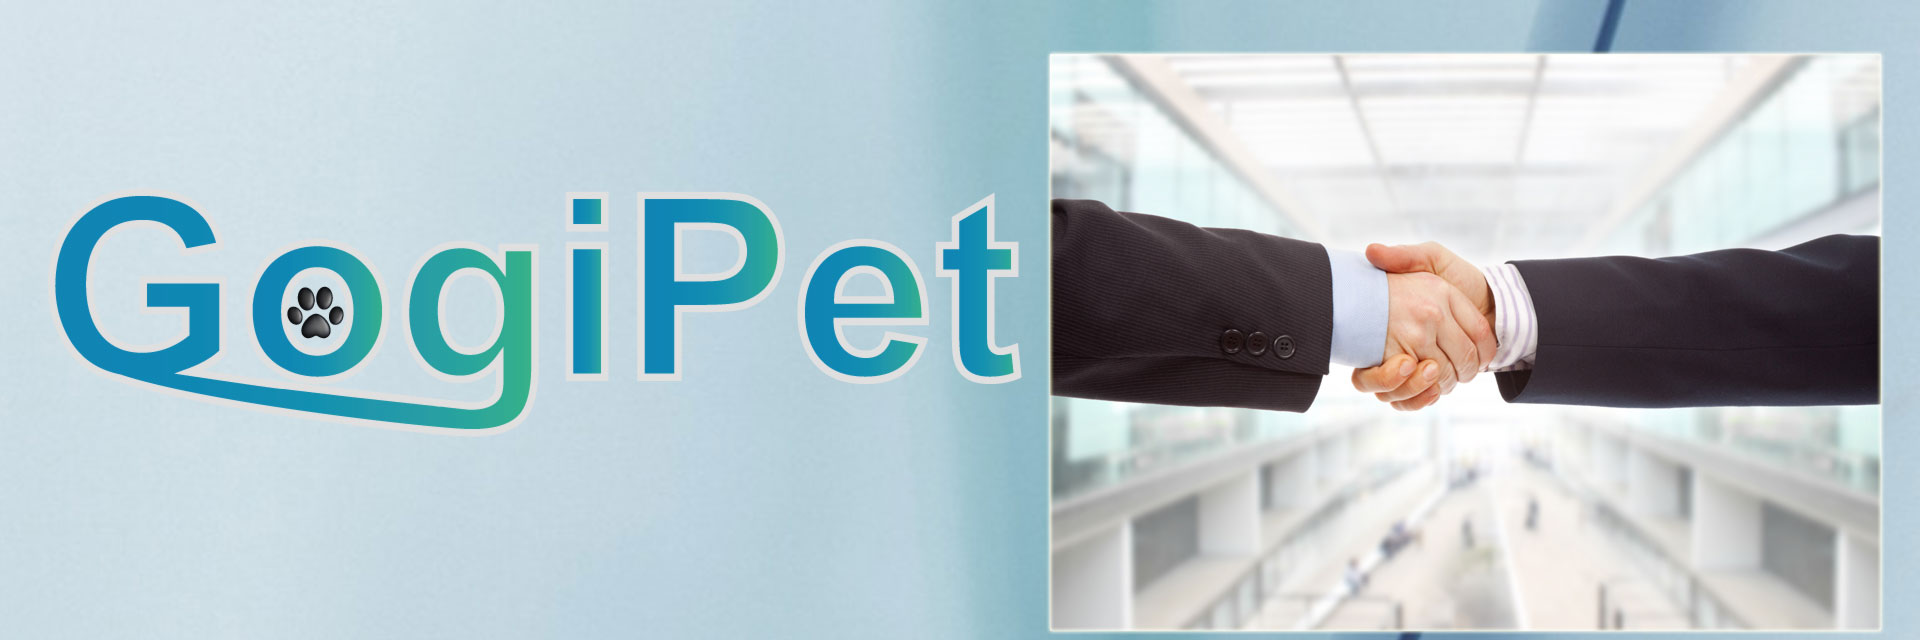 GogiPet for resellers in the pet trade and dog groomers